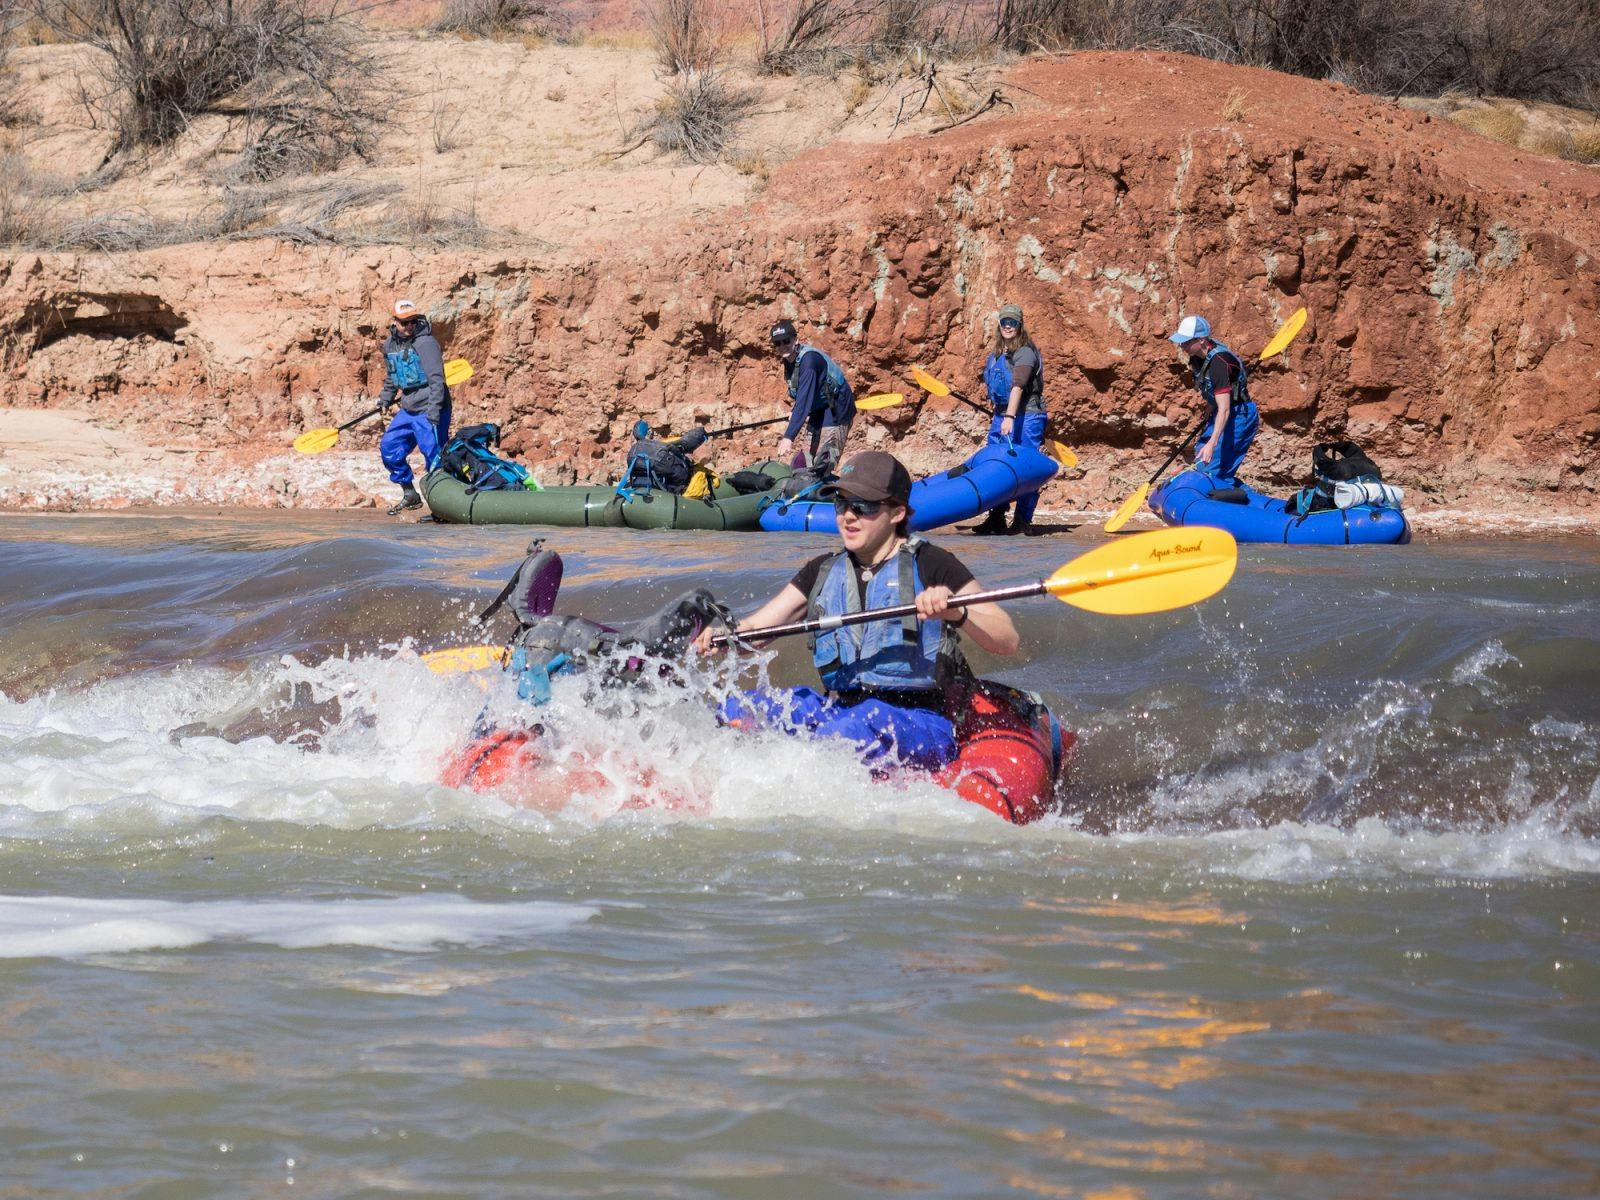 Lacey enjoying a little whitewater fun on the Colorado River.